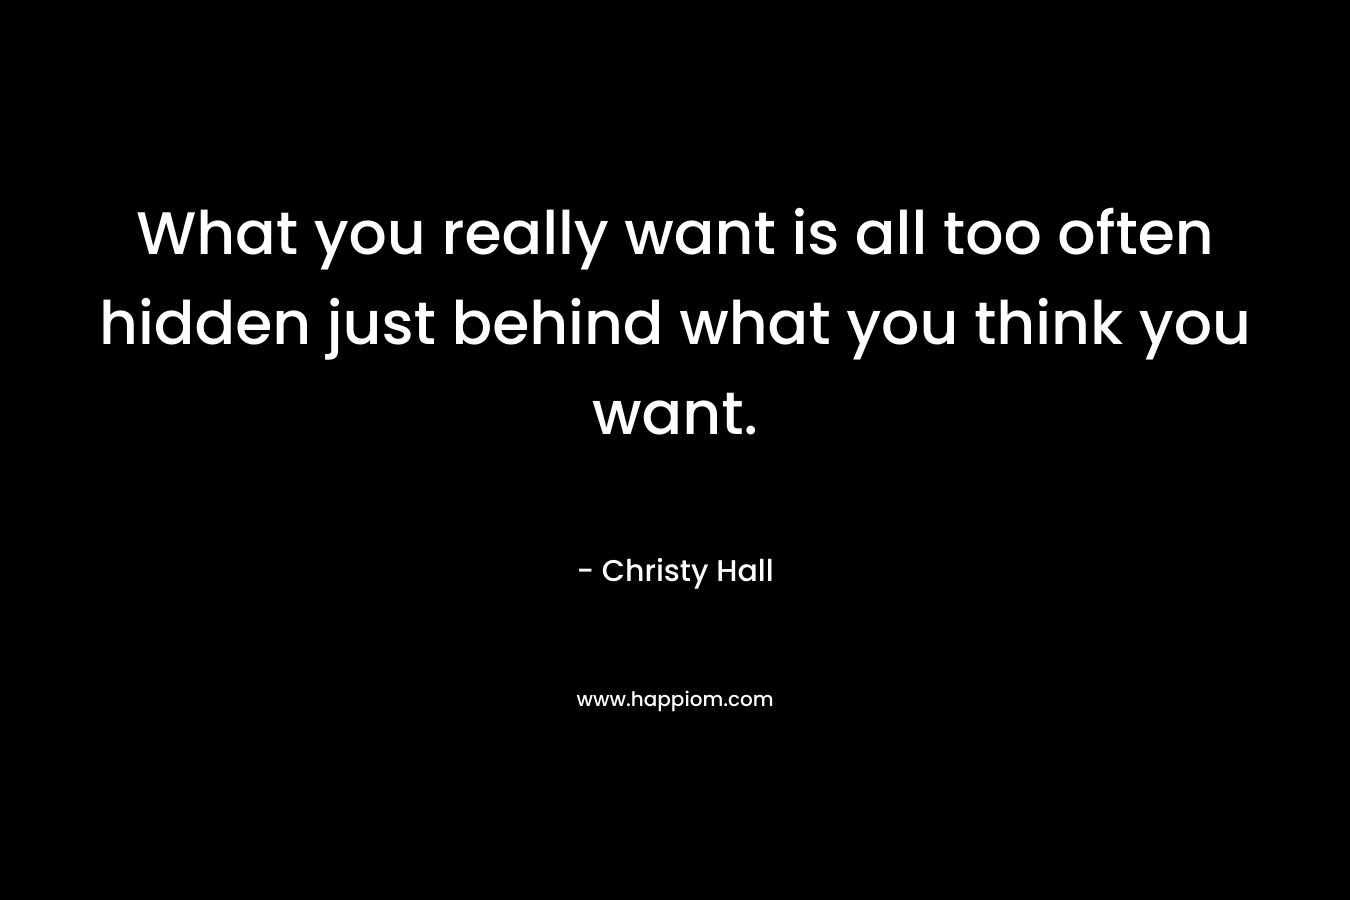 What you really want is all too often hidden just behind what you think you want.